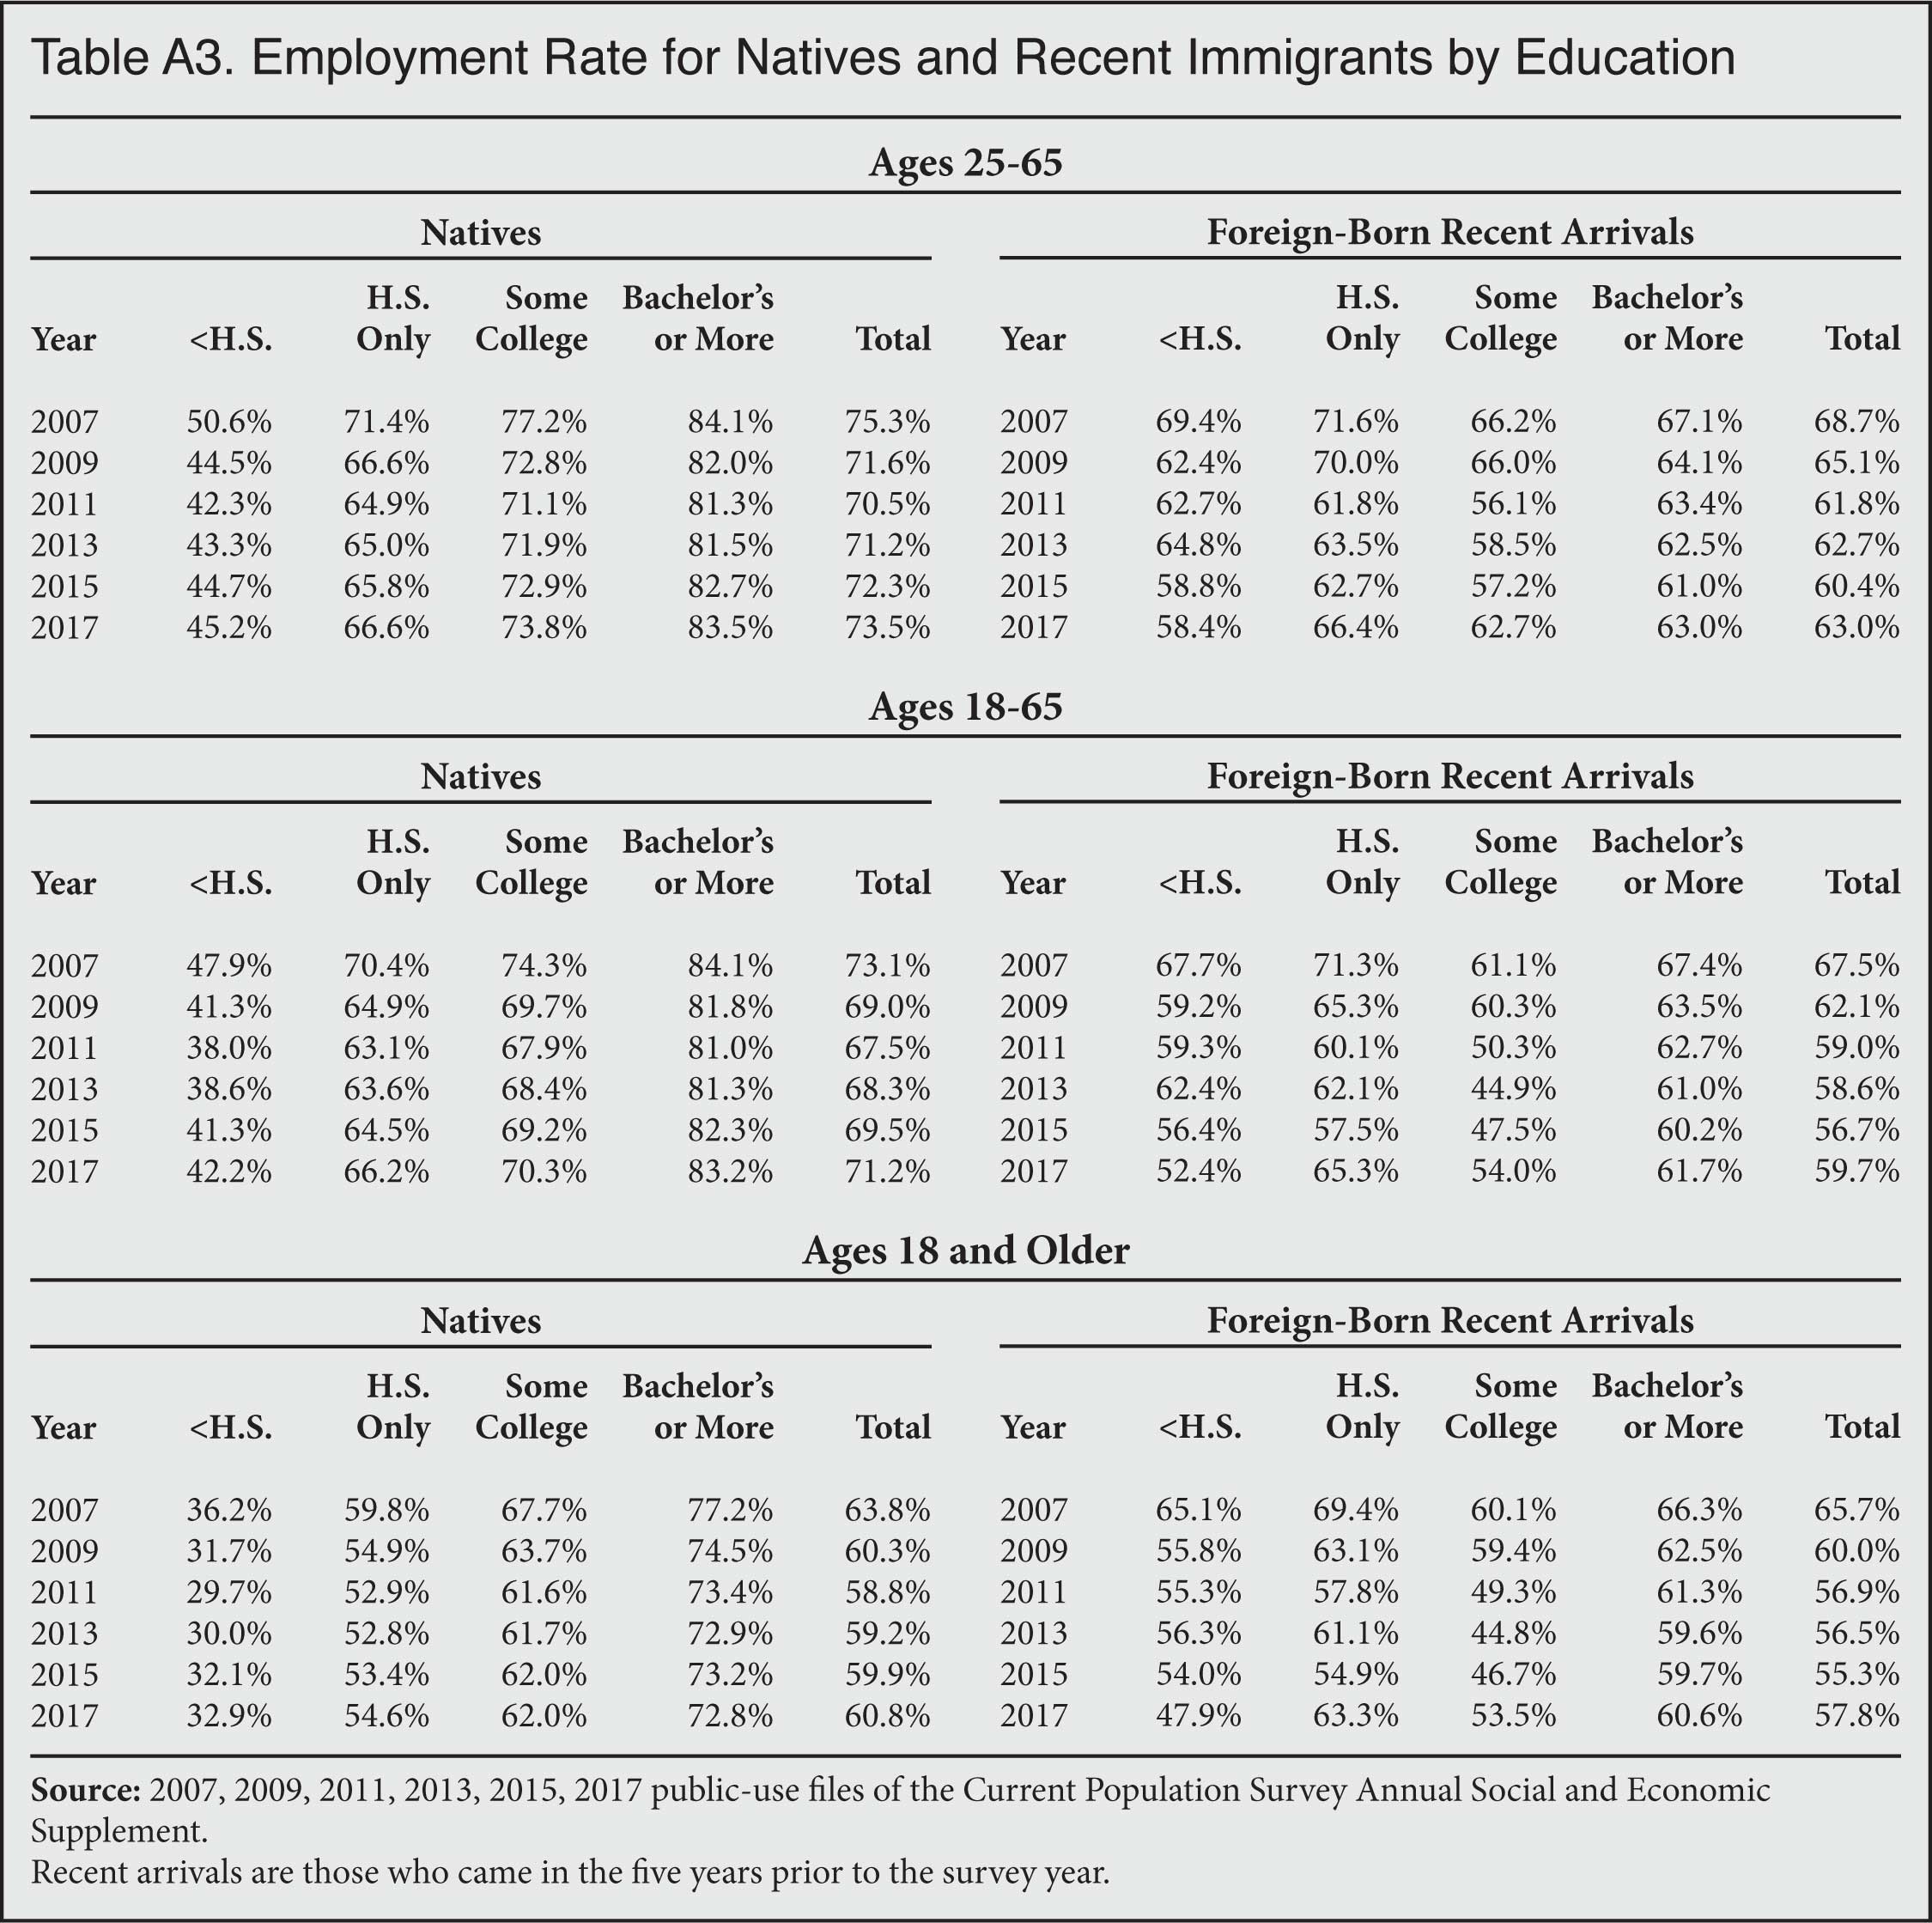 Table: Employment Rate for Natives and Recent Immigrants by Education, 2007-2017